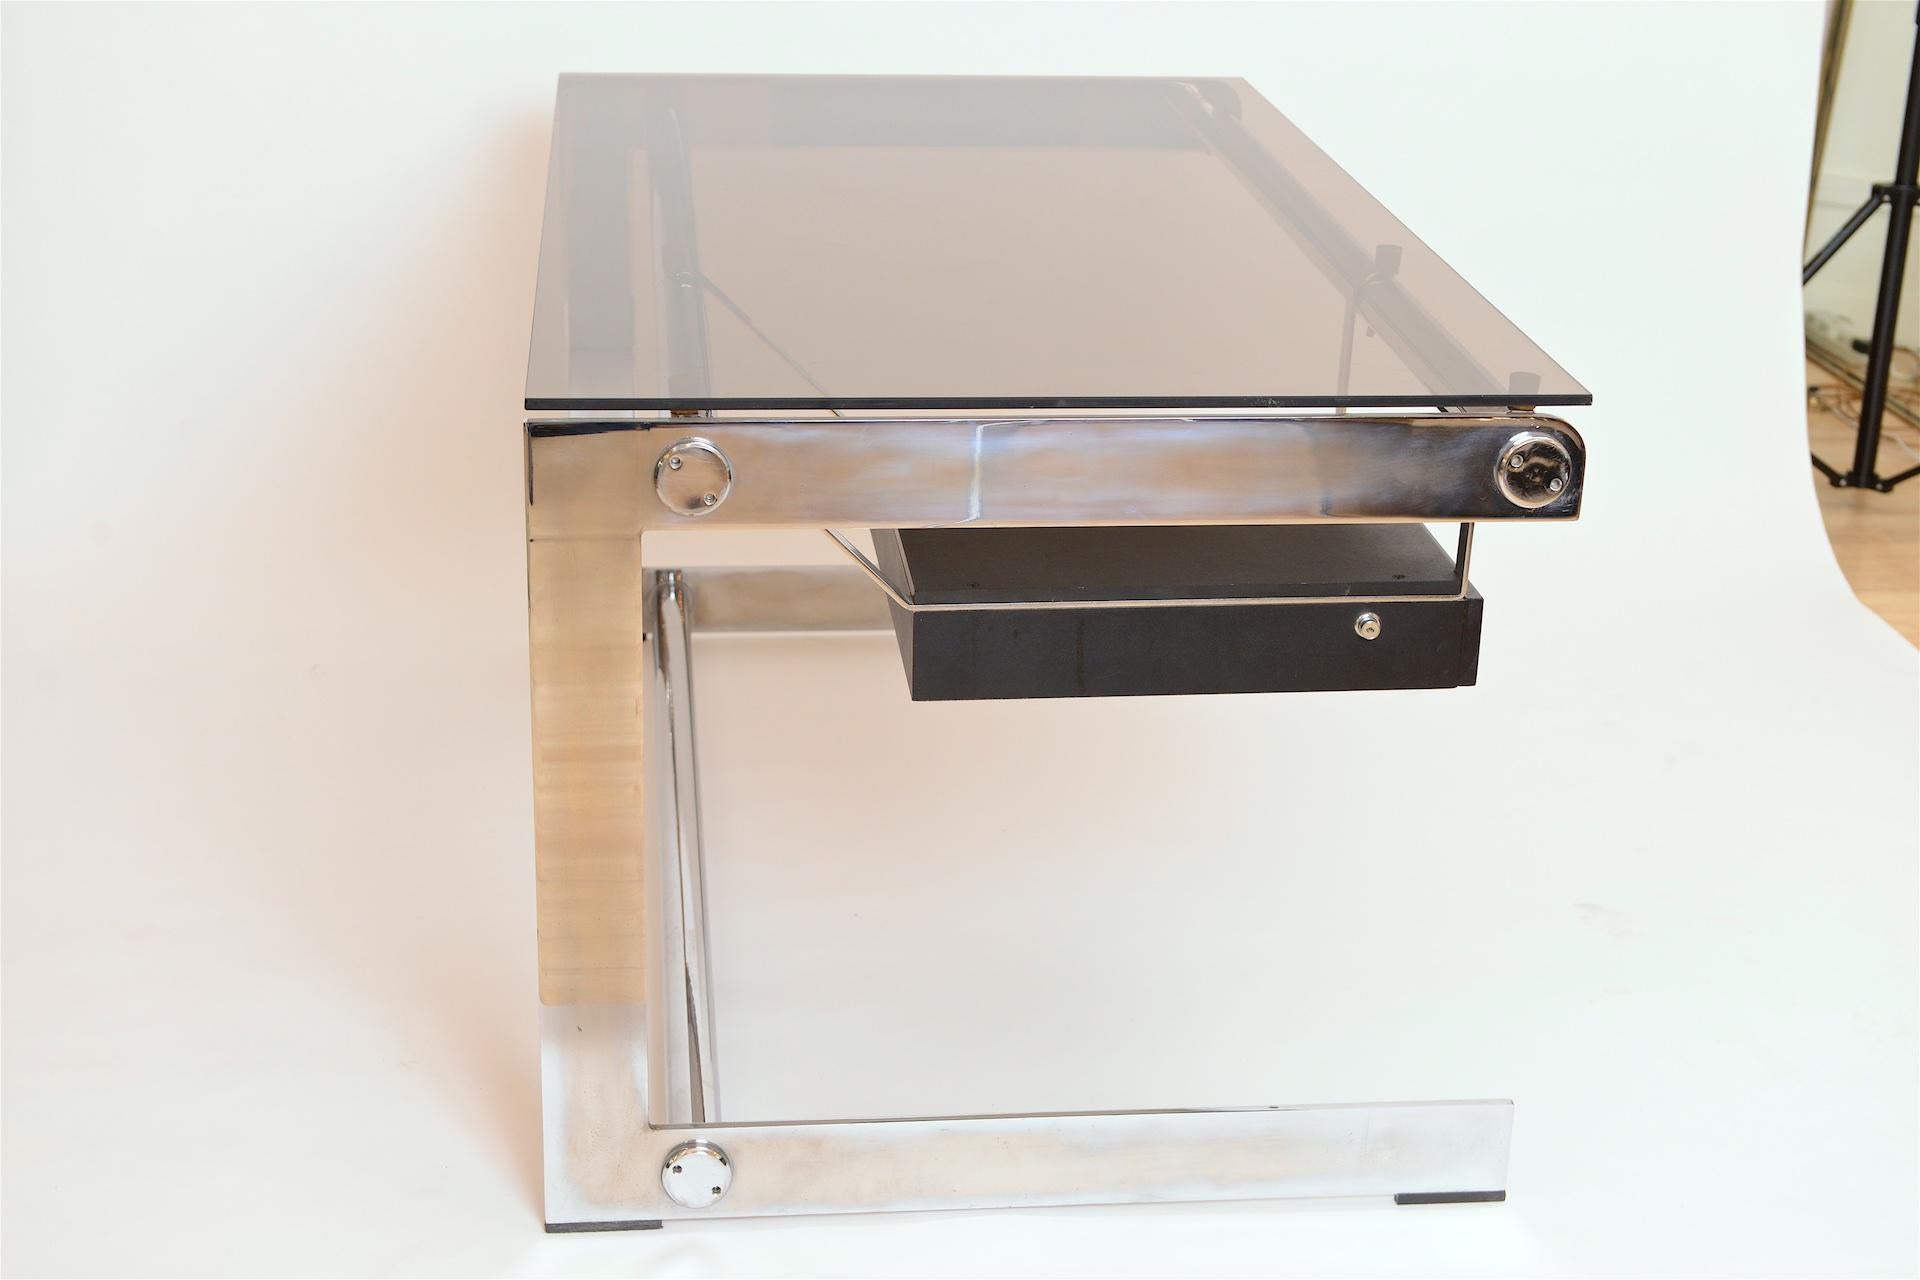 Steel Rare Chrome and Glass Desk by Gilles Bouchez for Airbourne, circa 1965